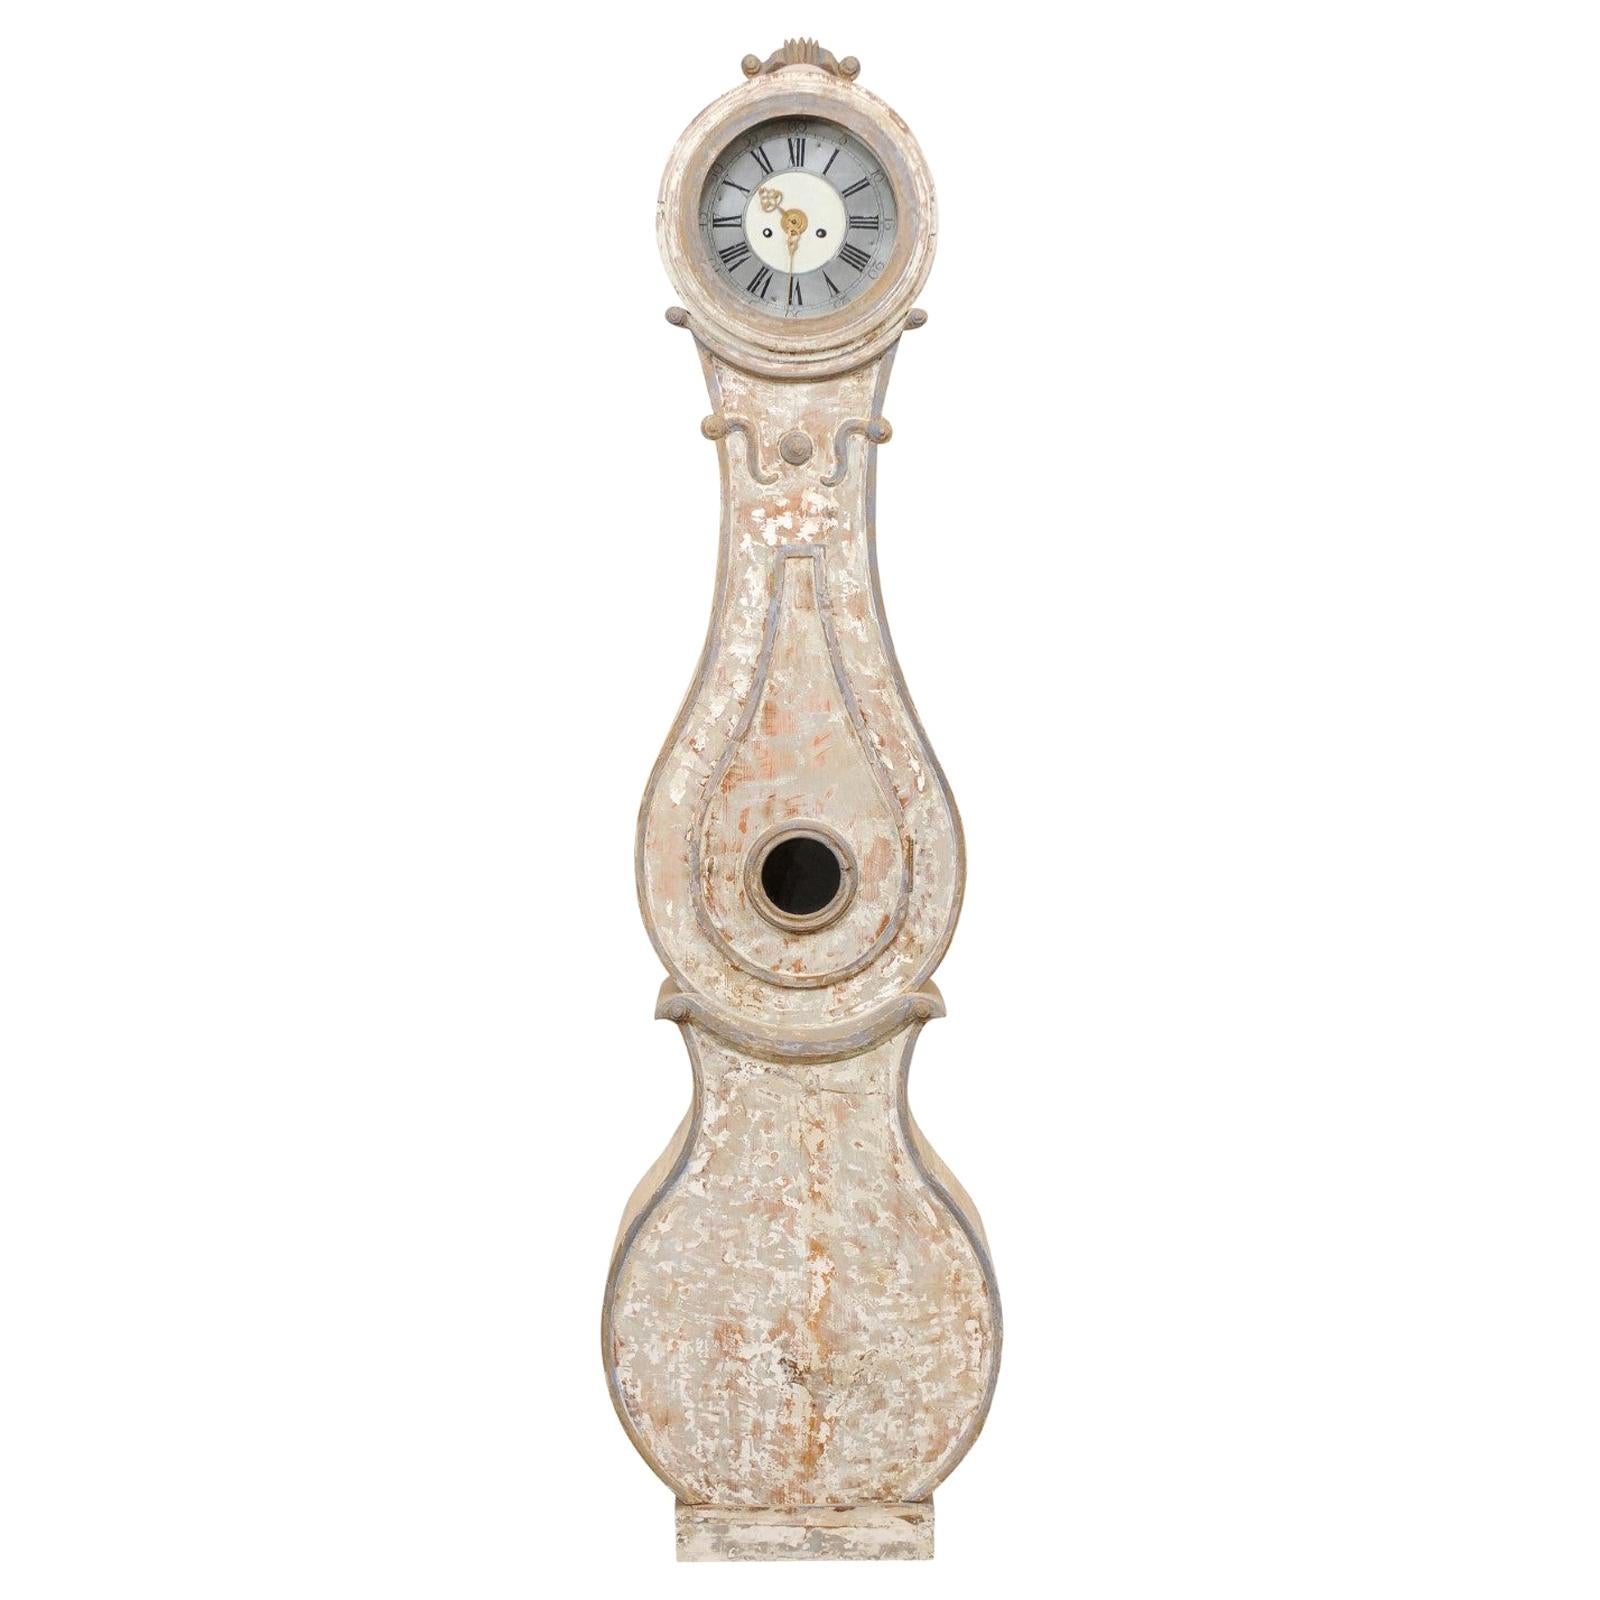 Gorgeous Swedish Fryksdahl Grandfather Clock from the 19th Century